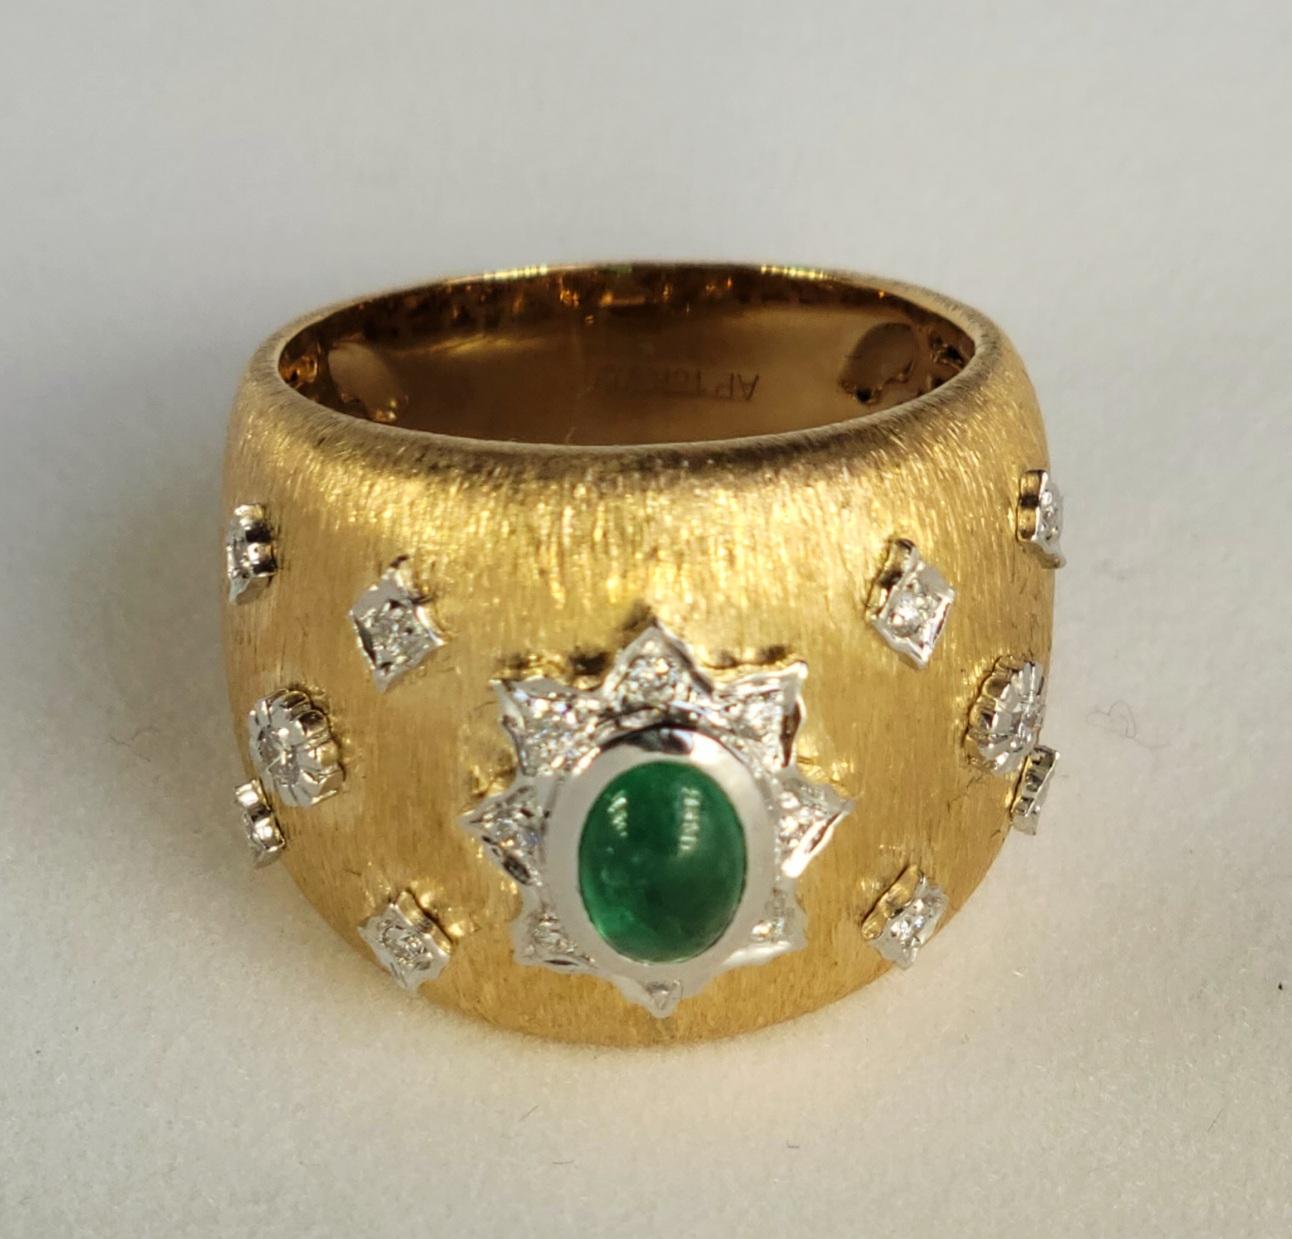 EMERALD Cocktail Ring with Diamonds in Florentine Finish inspired by Buccellati
1 EMERALD - 0.50cts 
18 ROUND DIAMONDS - 0.14cts
18K WHITE AND YELLOW GOLD - 11.86gm
SIZE - US 6.5 

This unique piece is made using the Florentine exquisite technique